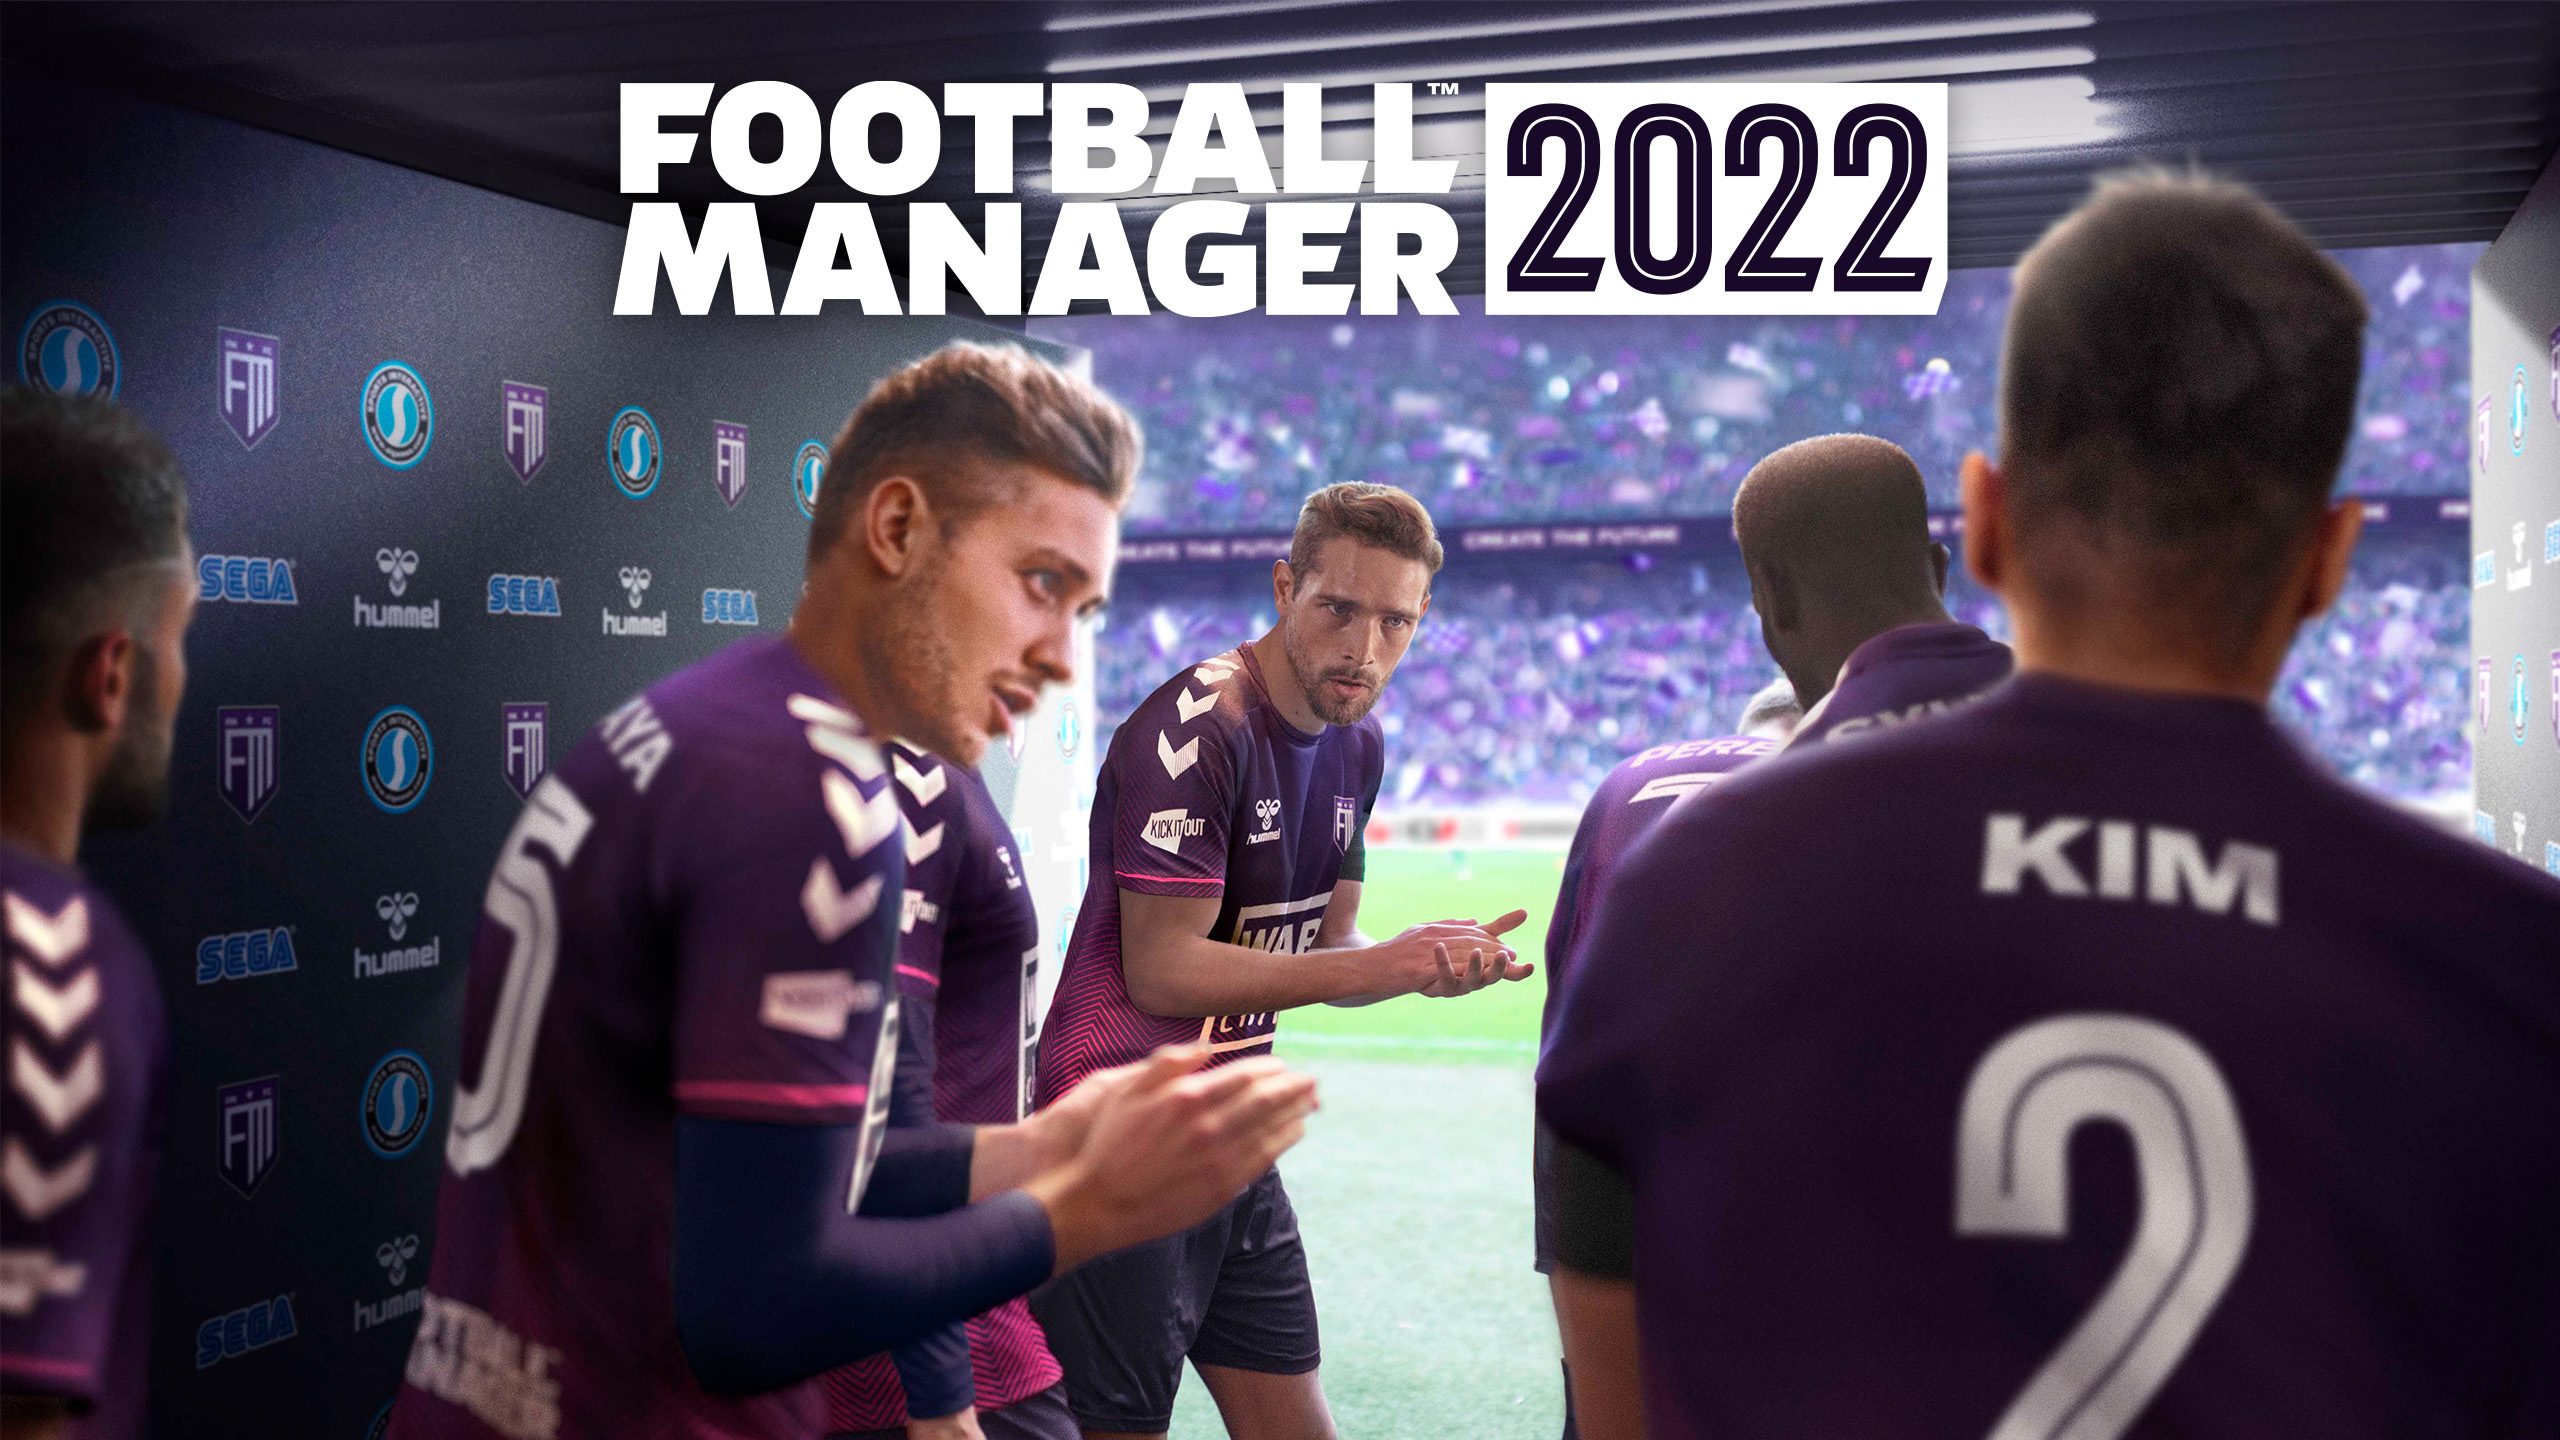 football manager 2022 announces a new match engine.